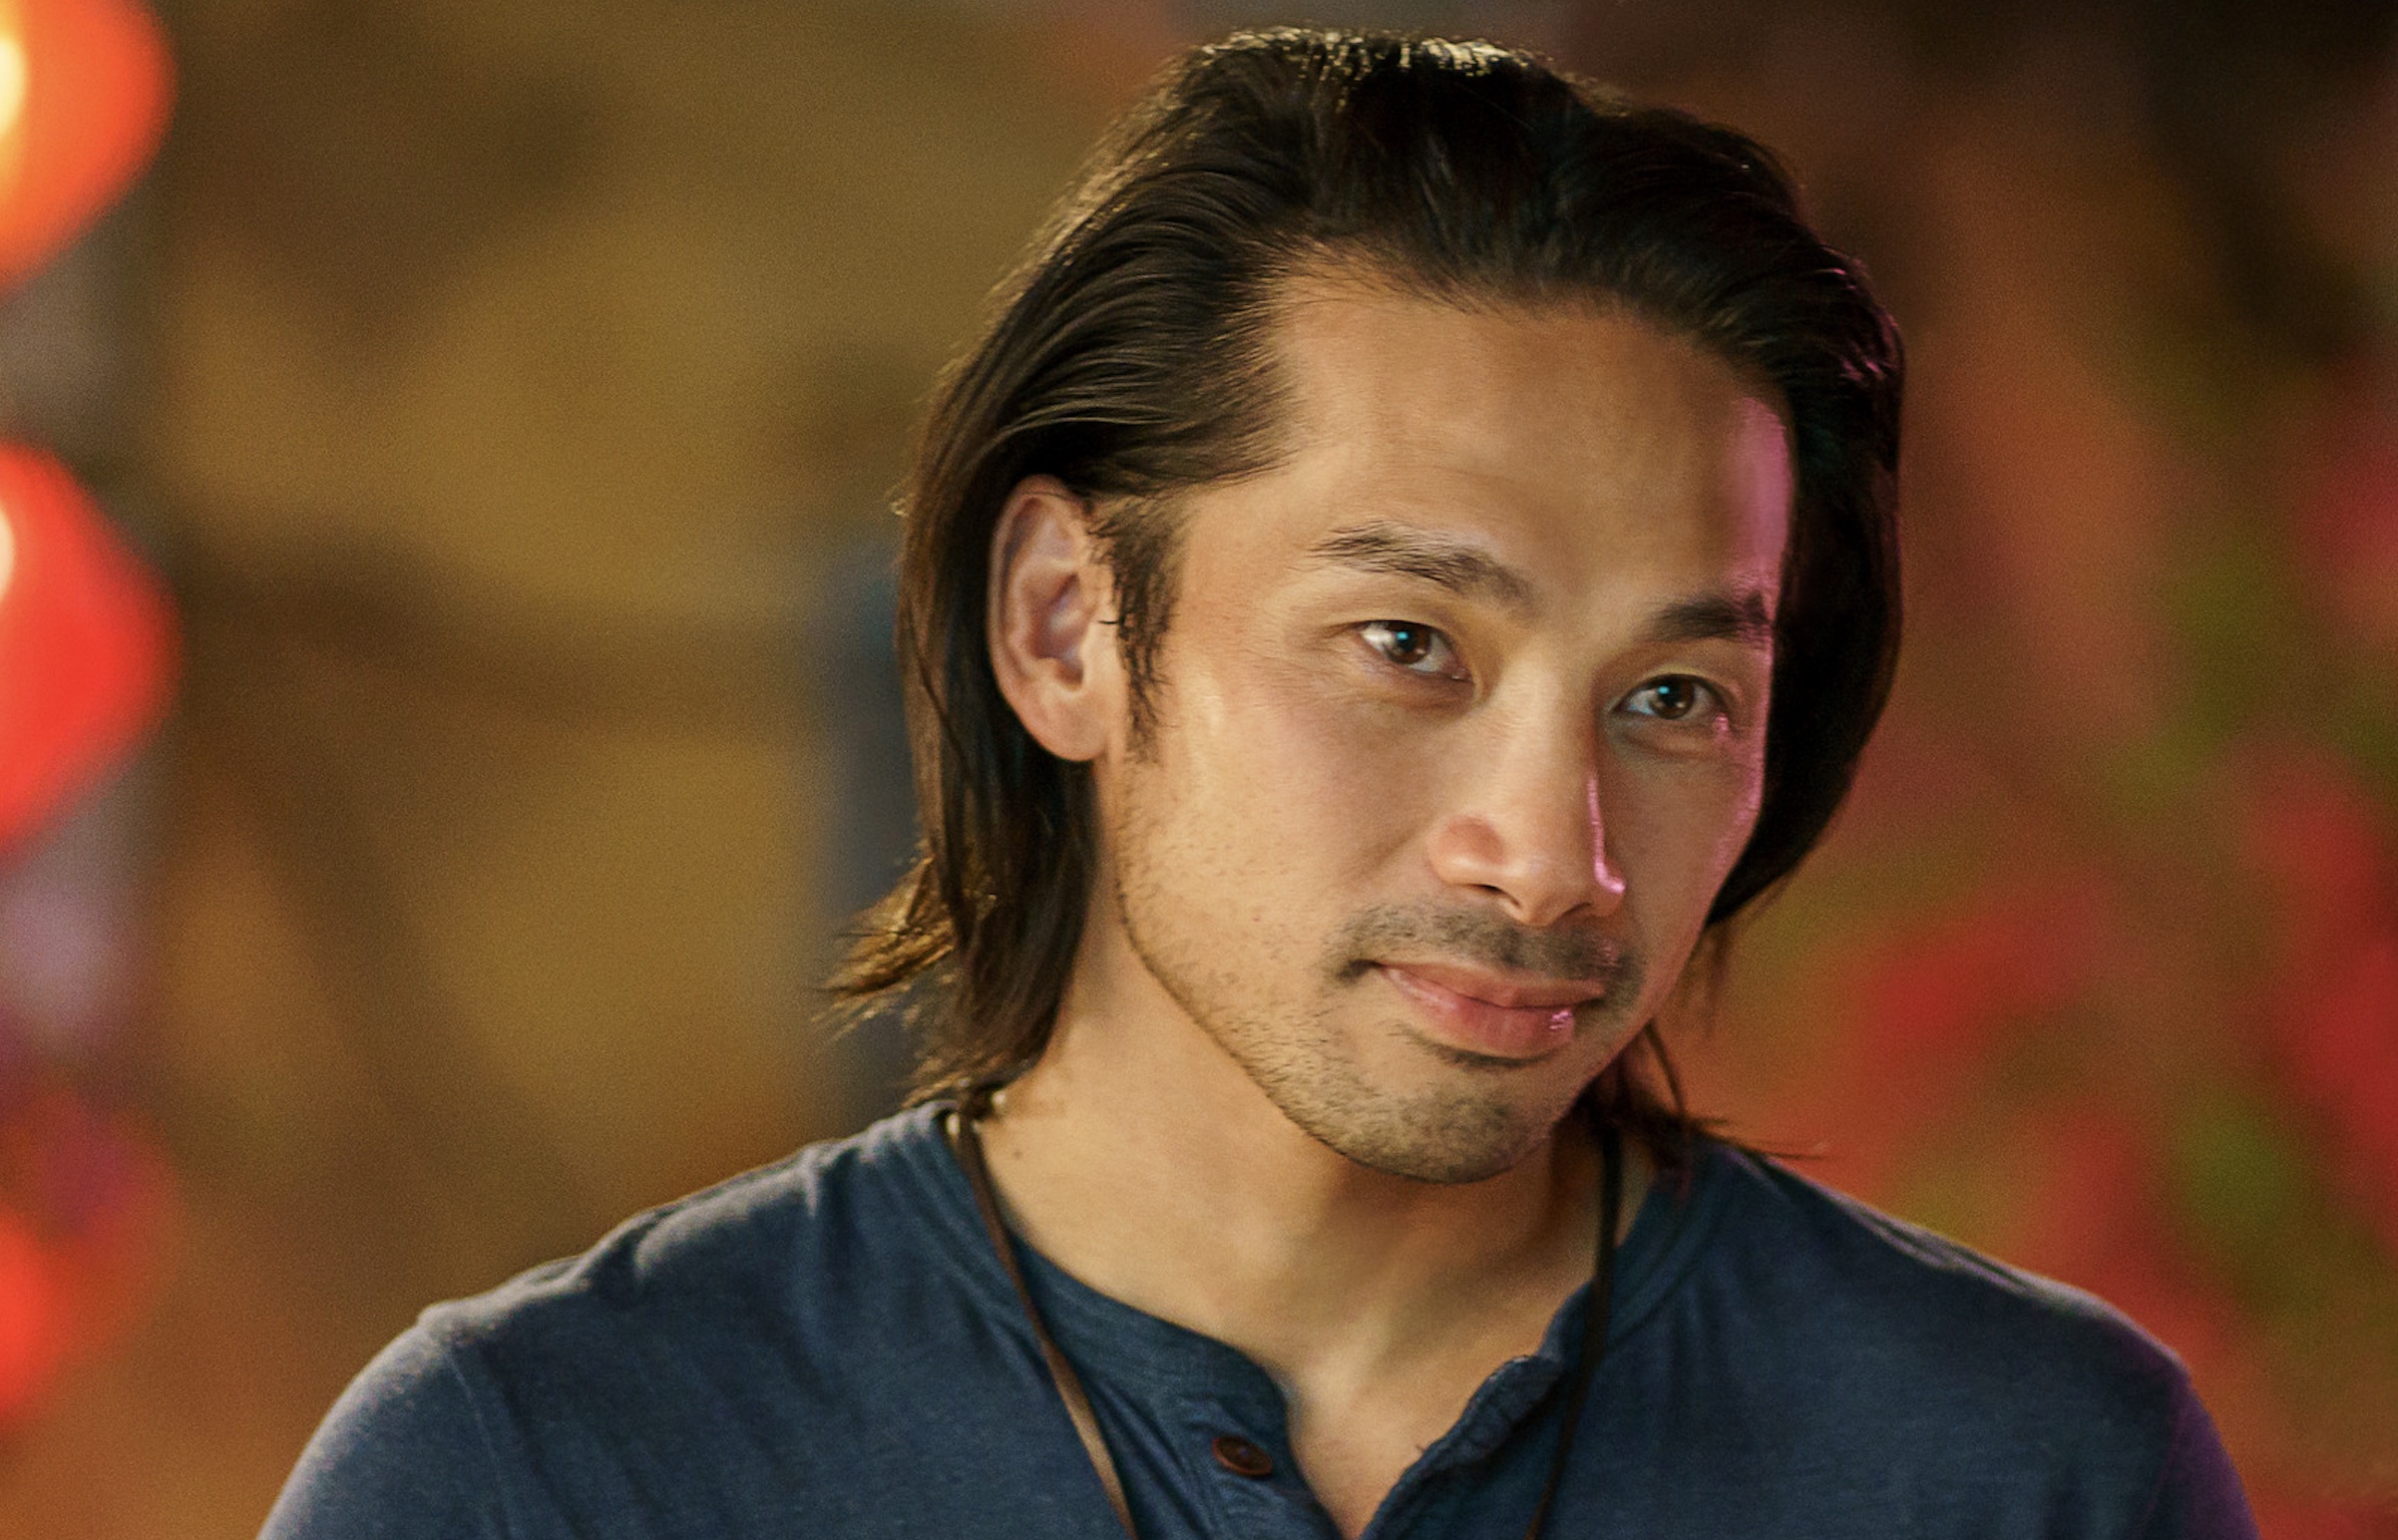 A Tourist's Guide to Love Cast on Netflix - Scott Ly as Sinh Thach